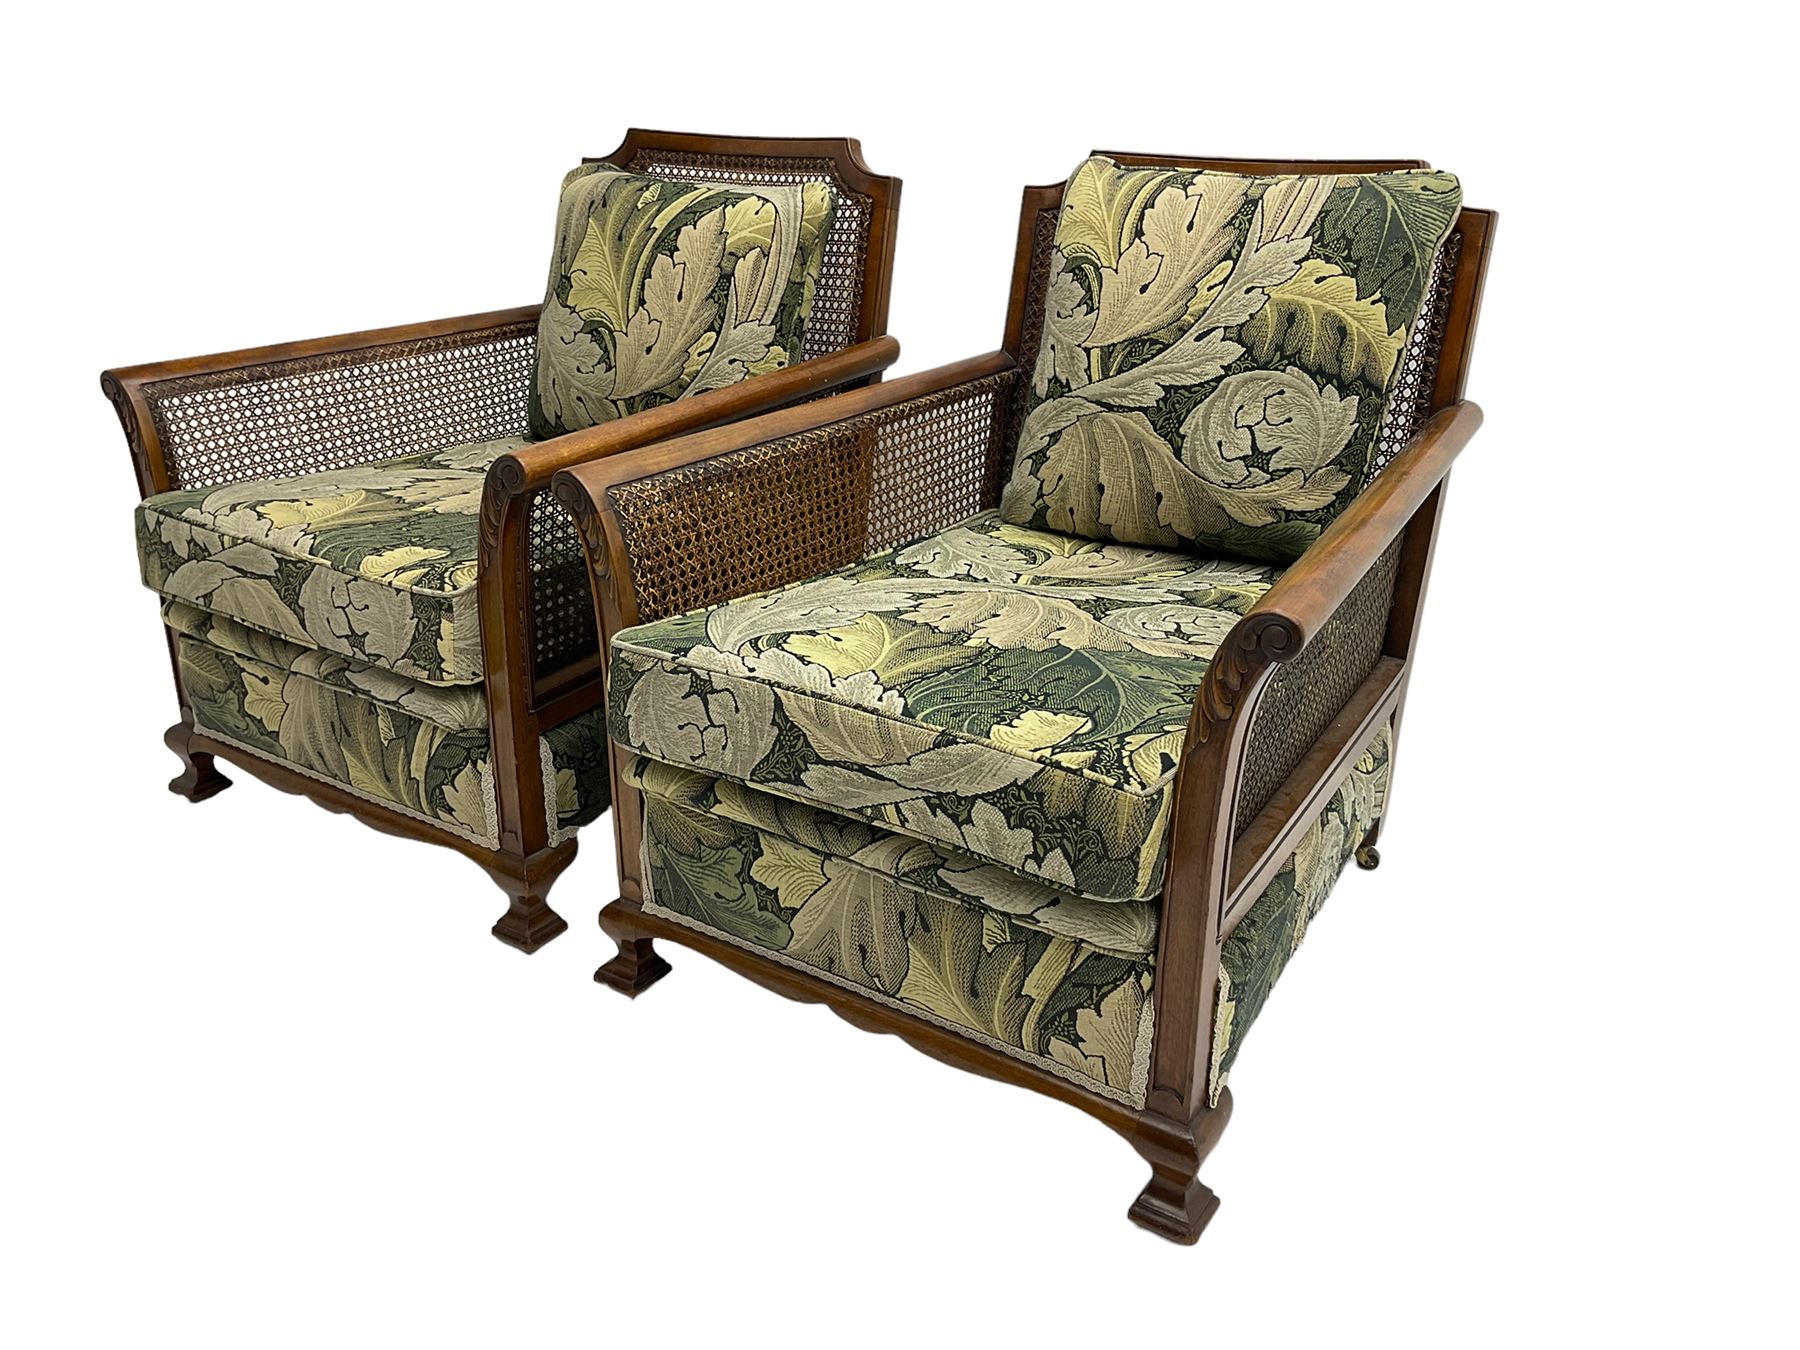 Early 20th century bergere lounge suite - Image 8 of 13